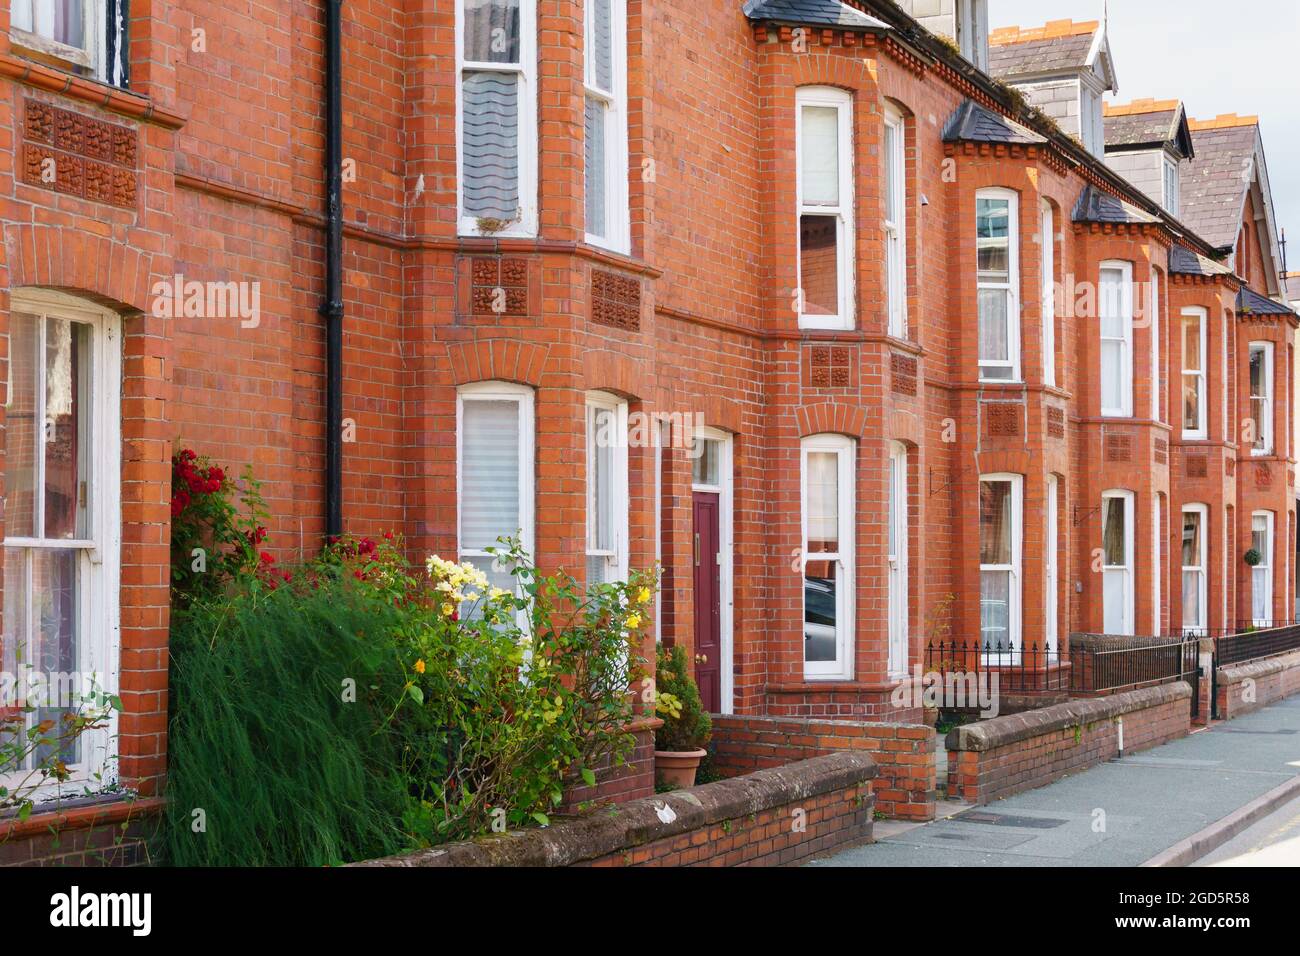 Typical red brick Victorian style terraced residential housing with bay windows and small front gardens opening on to a street in the United Kingdom Stock Photo